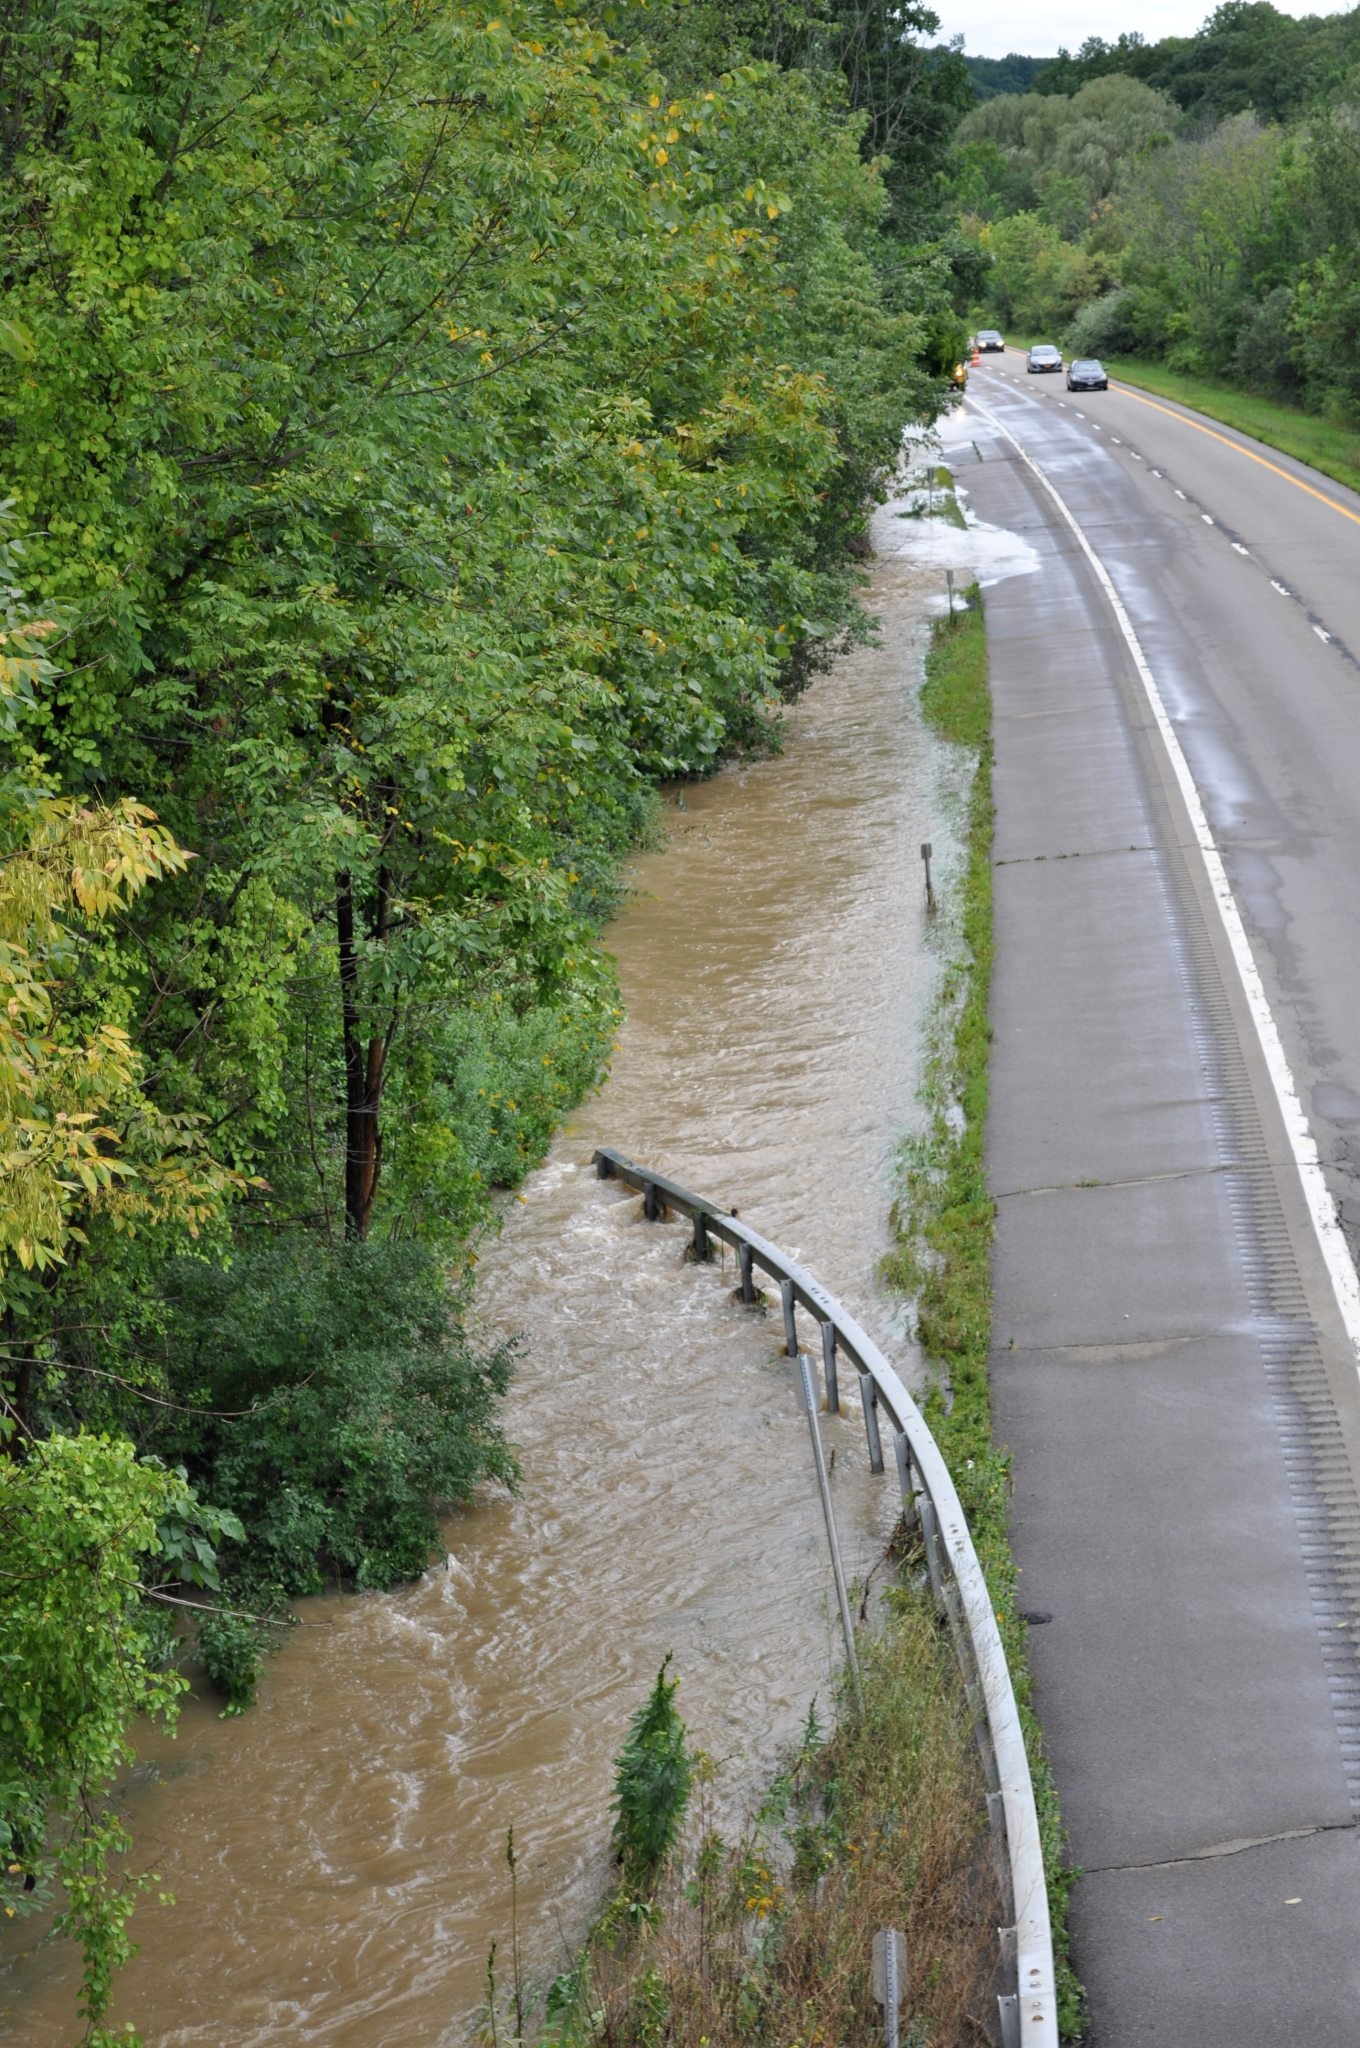 east-fishkill-ny-i84-eastbound-as-the-water-starts-to-recede-from-the-roadway-credit-facebook-fan-pic-by-bill-farrell.jpg 